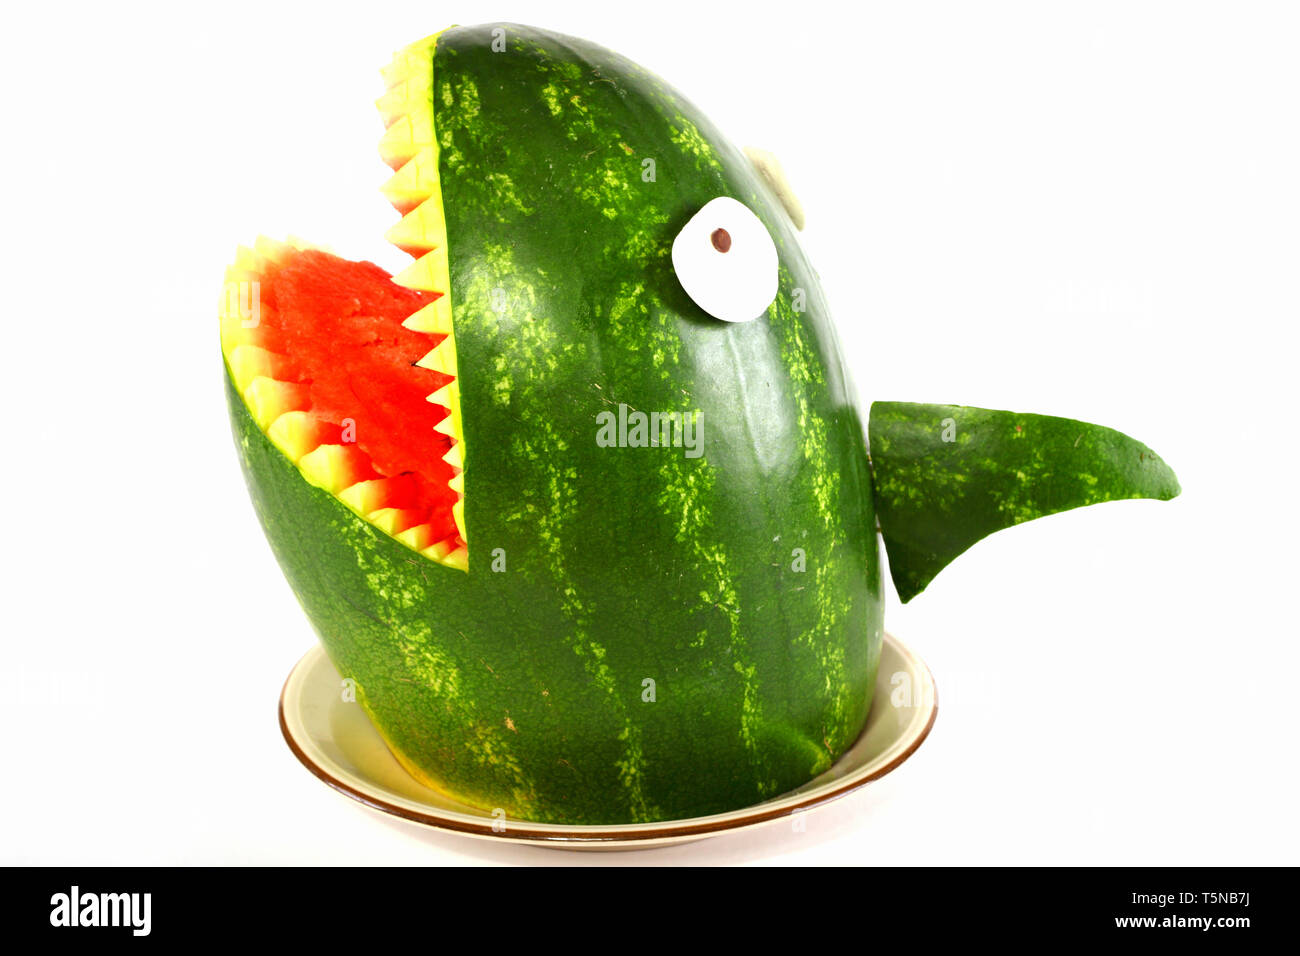 Watermelon shark - Shark carved out of a watermelon Stock Photo